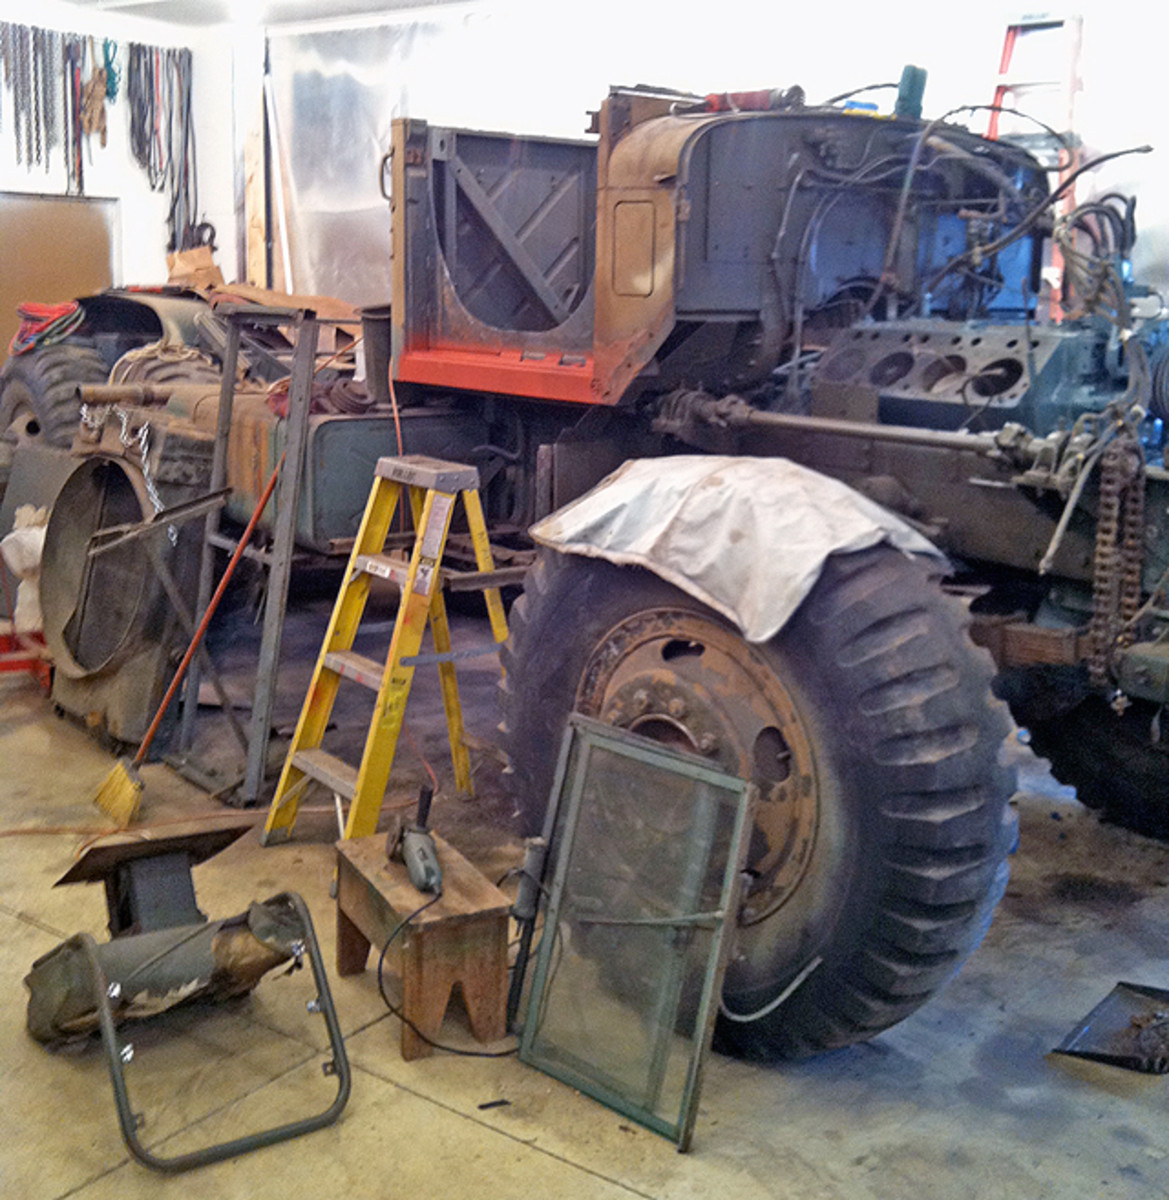 Here is the M125 being stripped of everything while the engine was being completely restored to running condition.